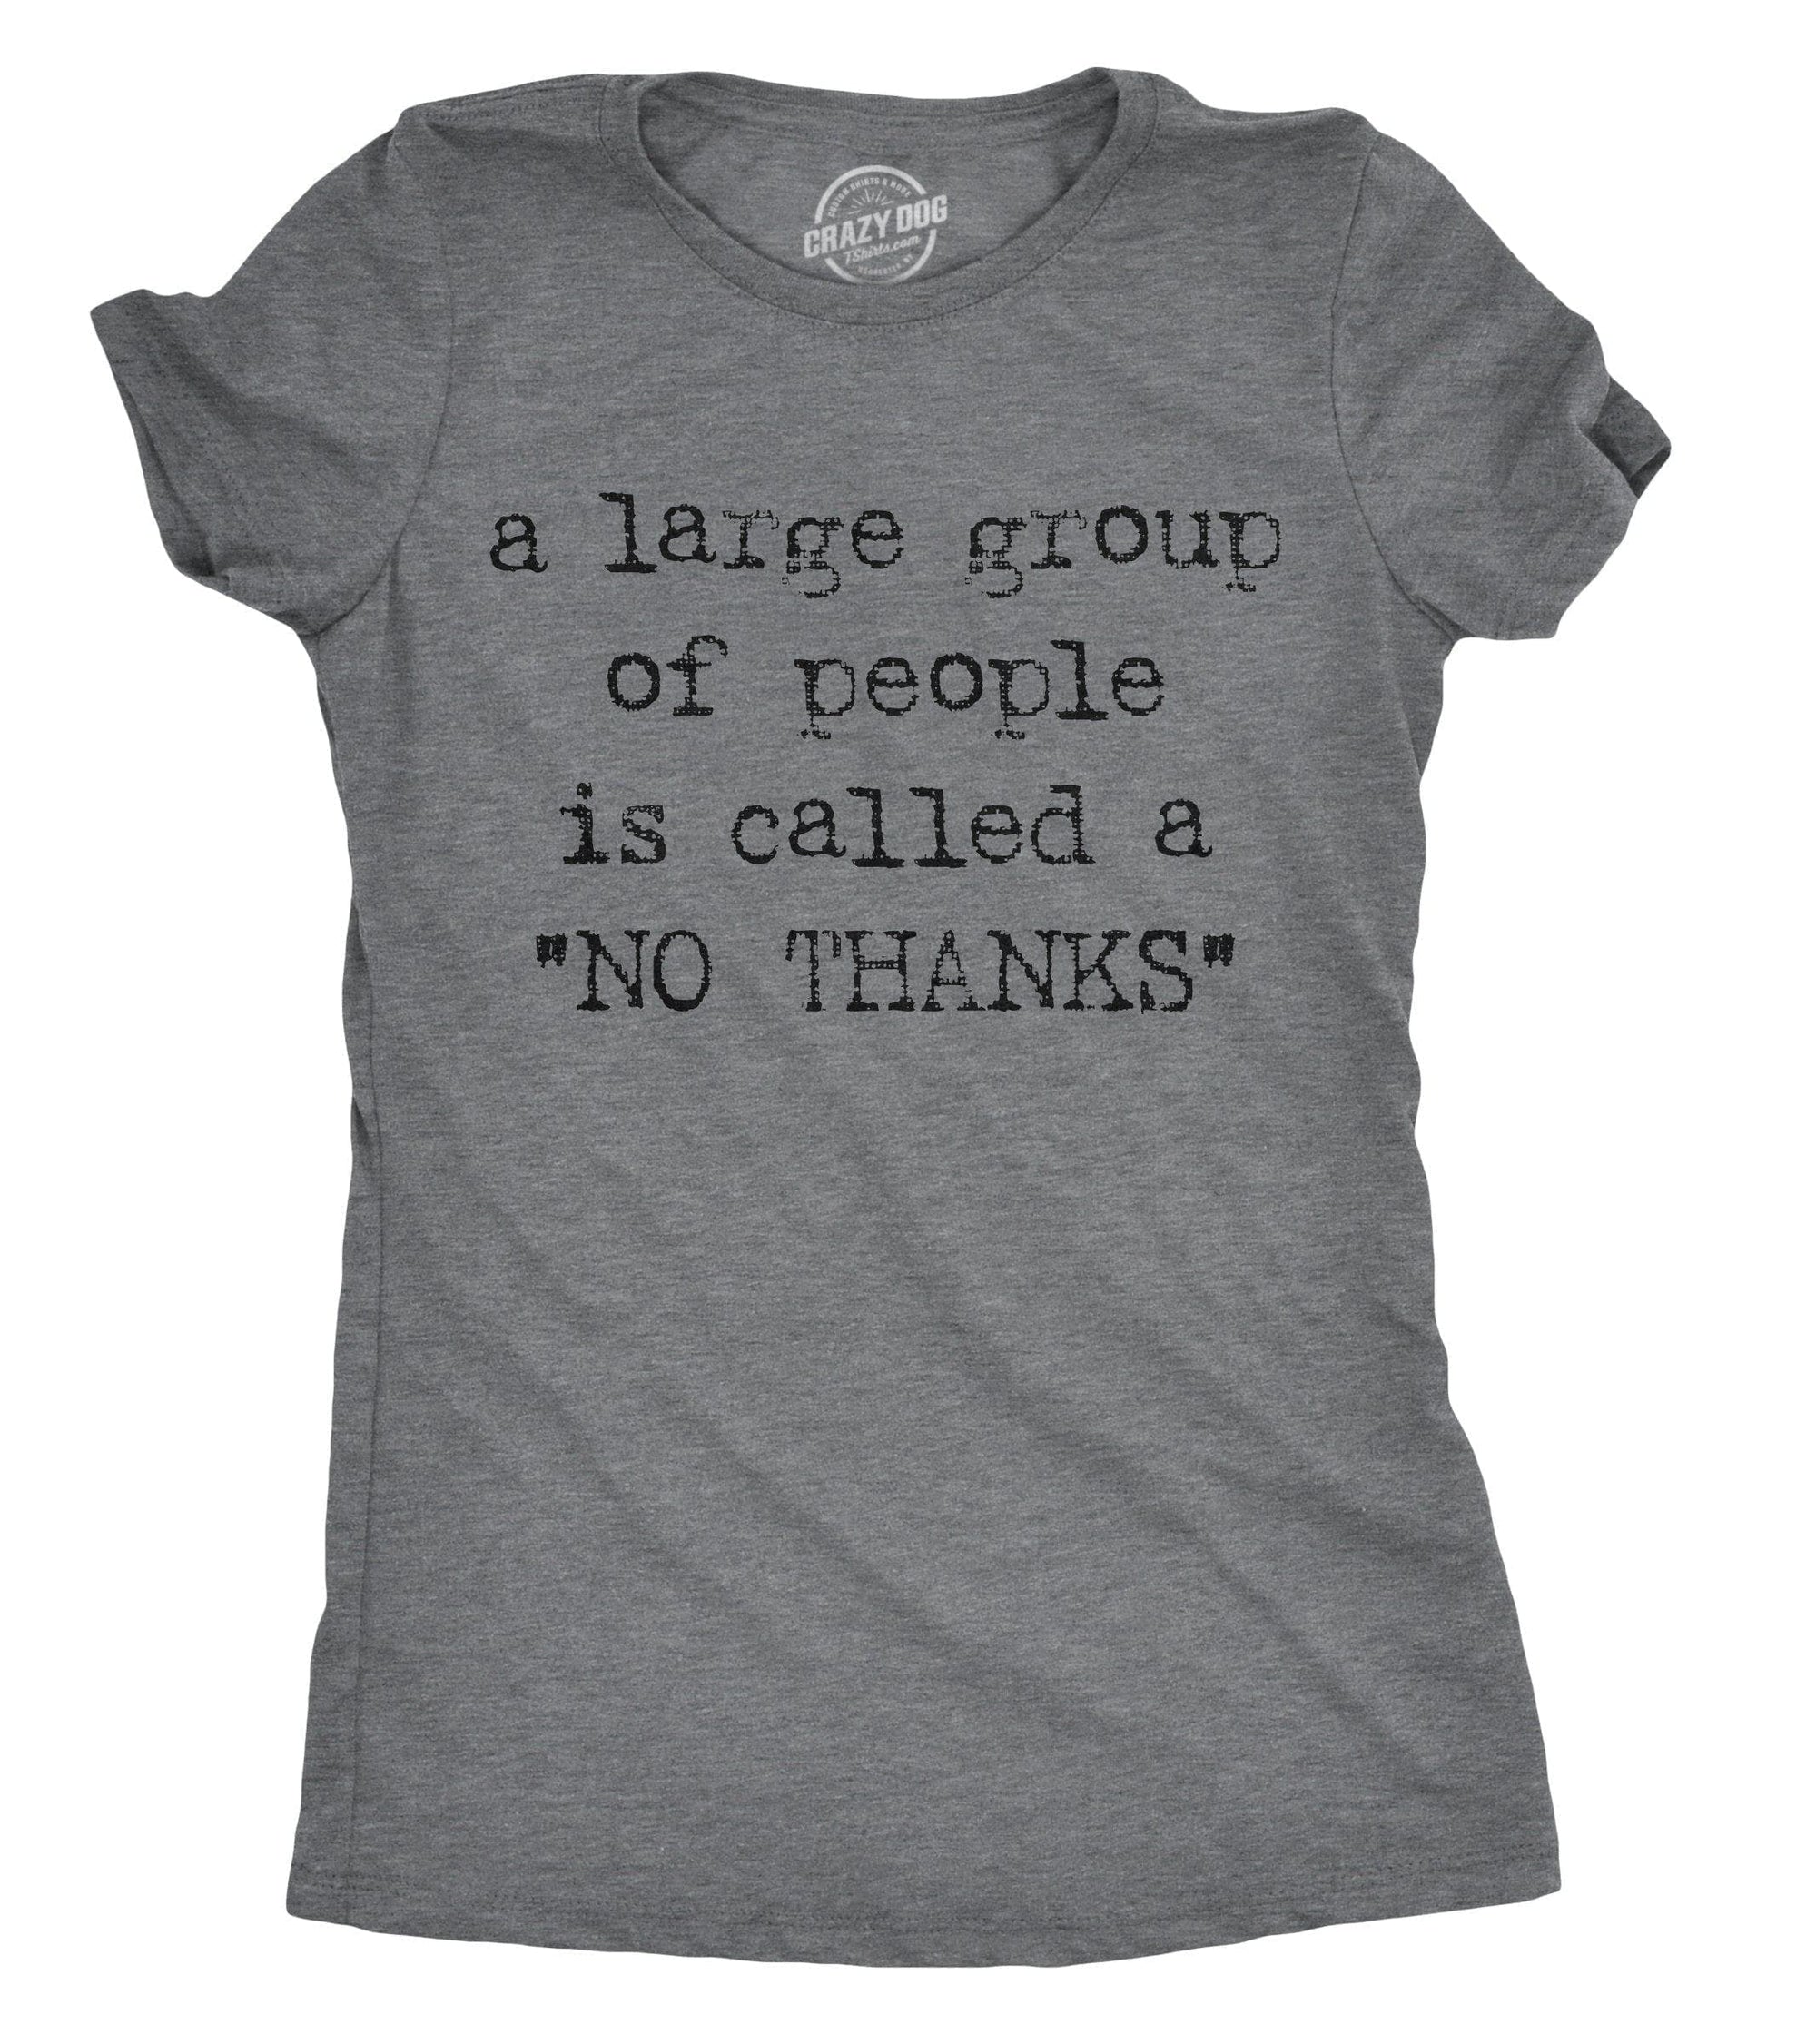 A Large Group Of People Is Called A "No Thanks" Women's Tshirt - Crazy Dog T-Shirts